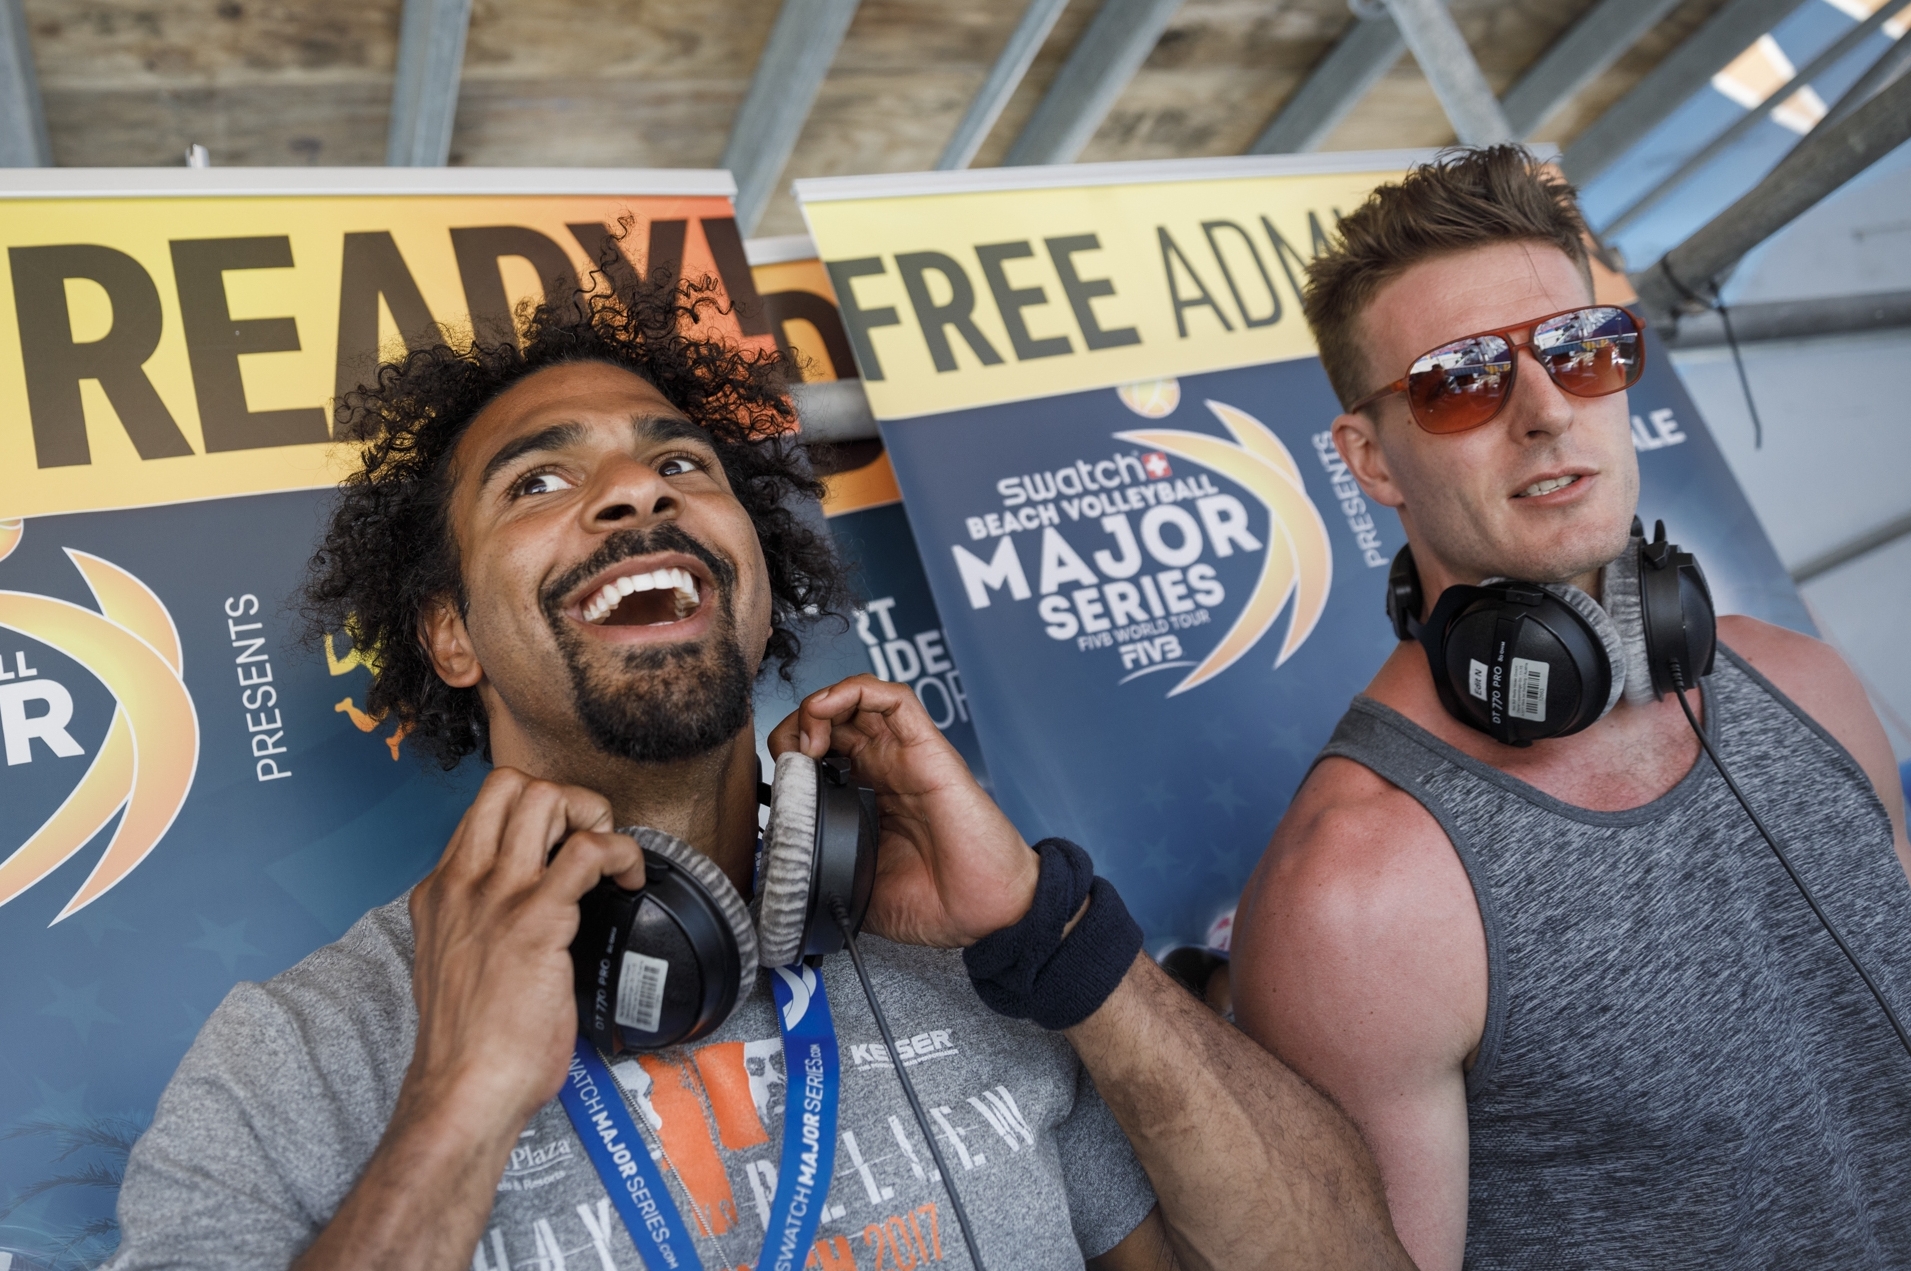 David Haye (left) with Martin Reader in the commentary box